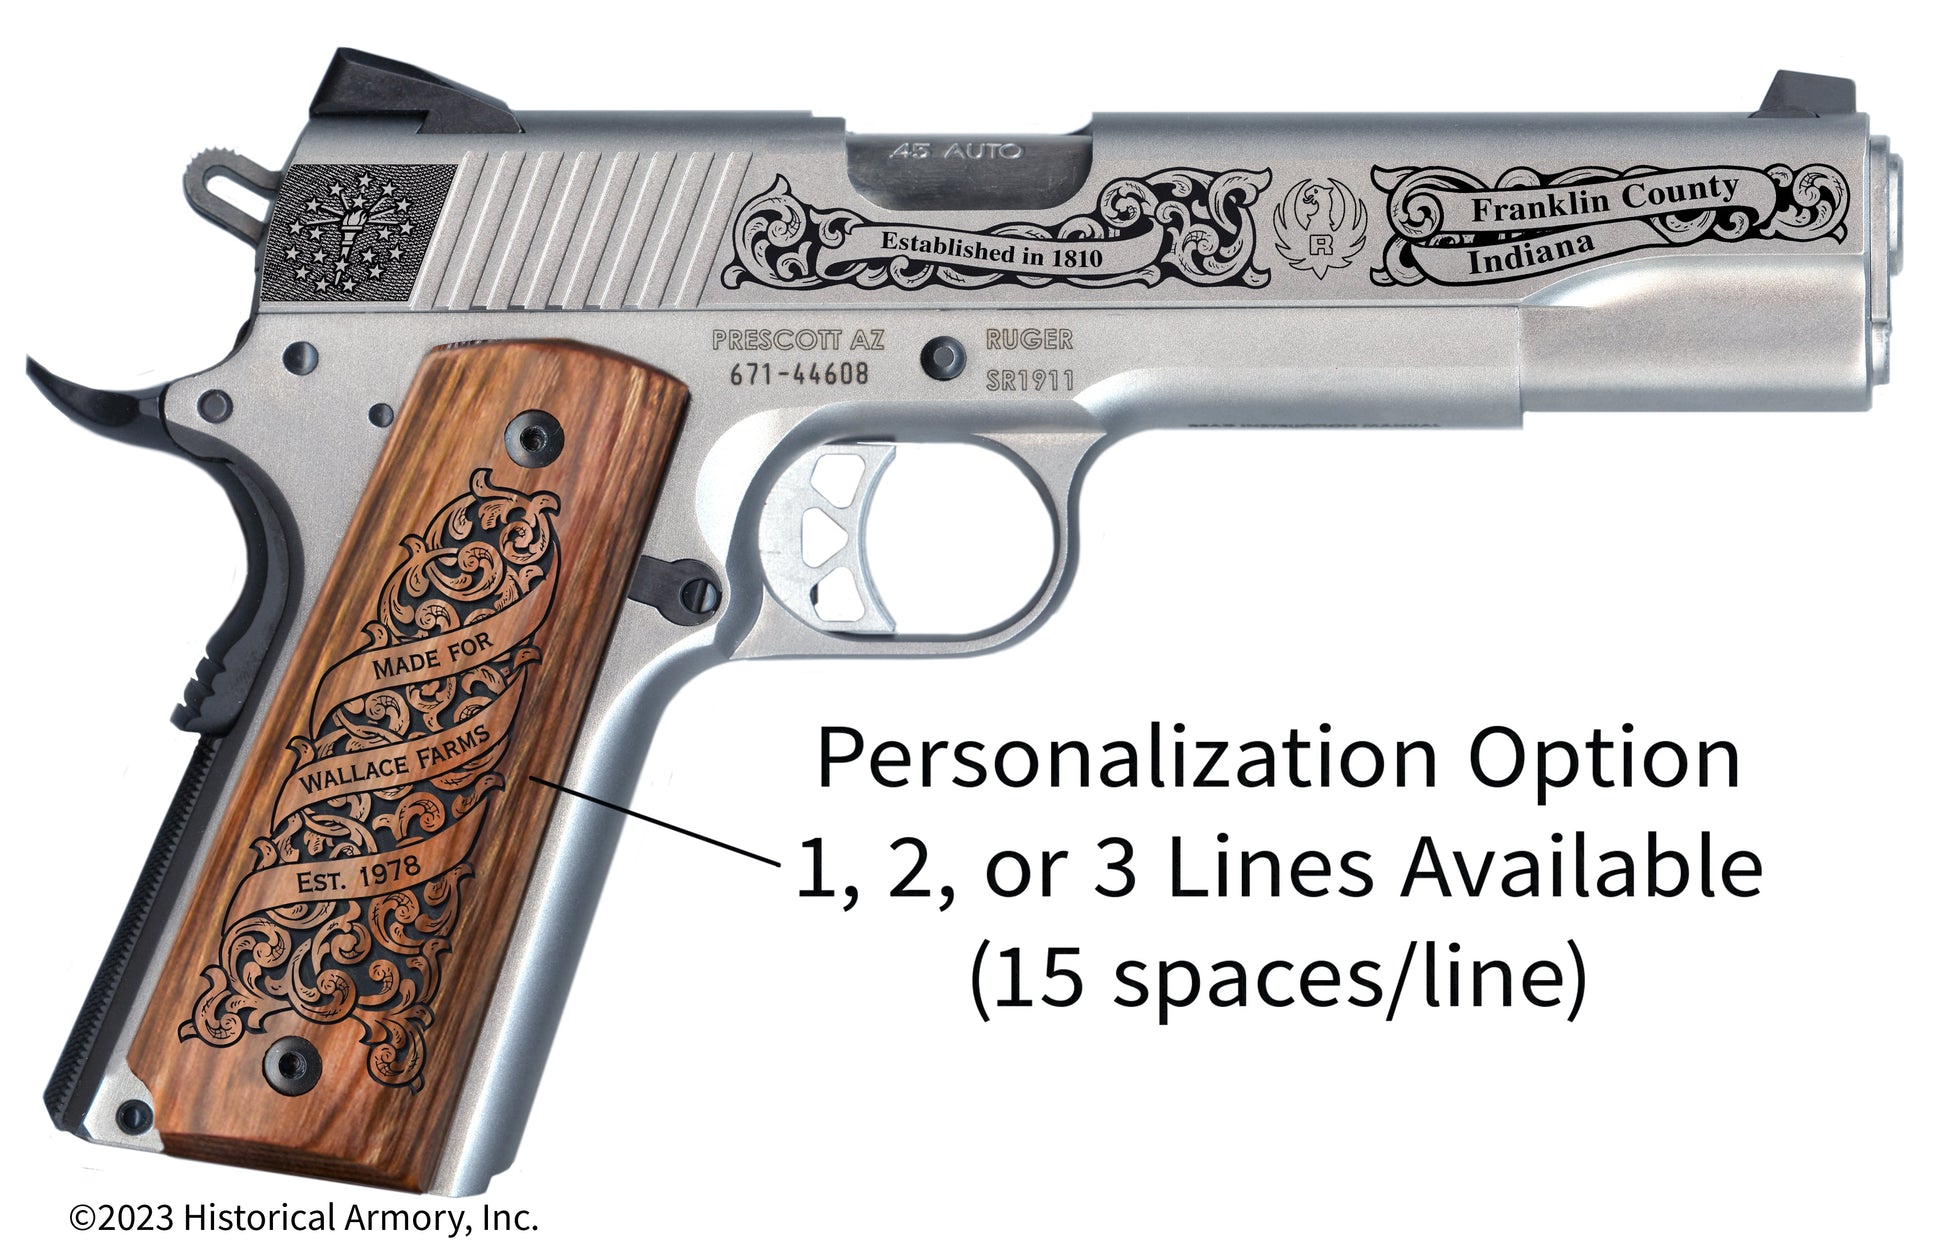 Franklin County Indiana Personalized Engraved .45 Auto Ruger 1911